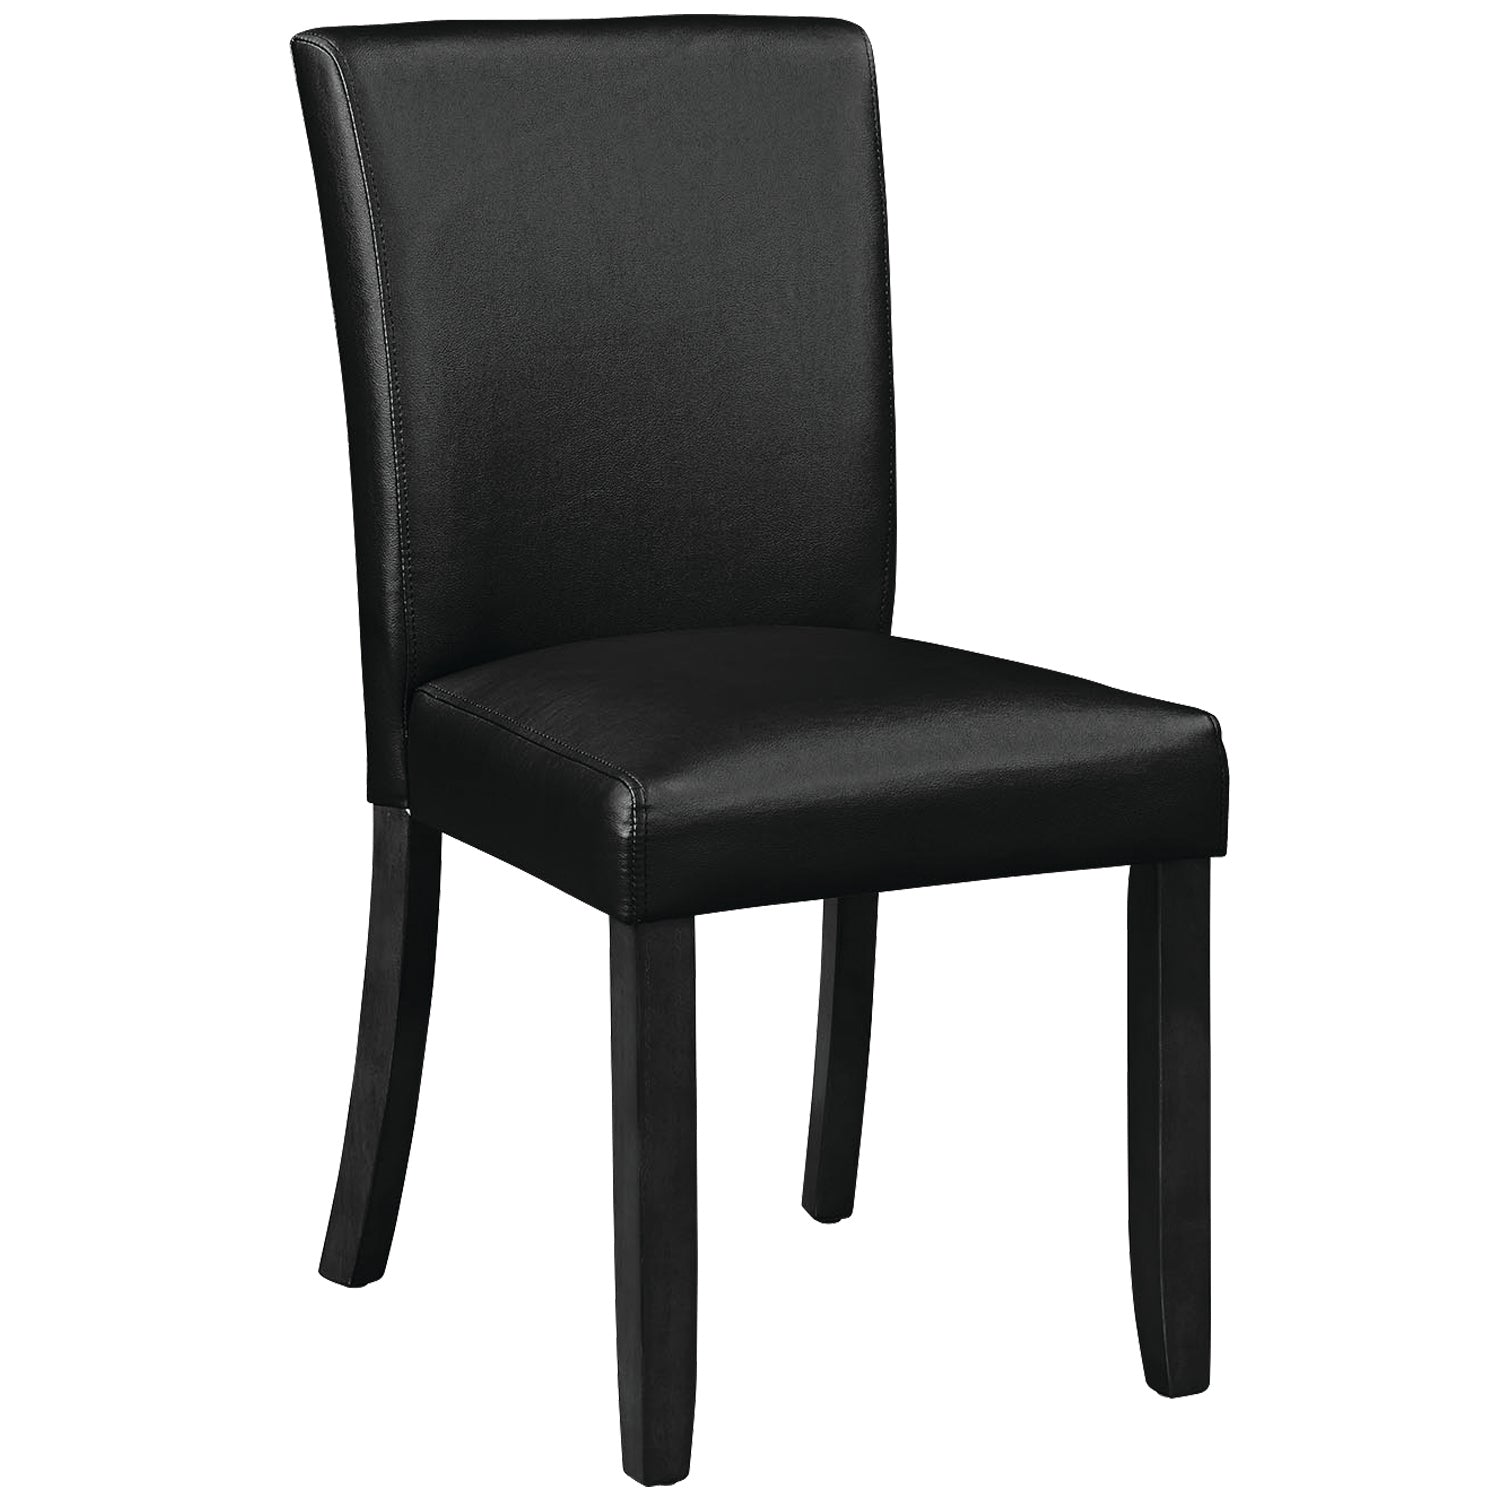 Padded vinyl dining chair in a black finish.